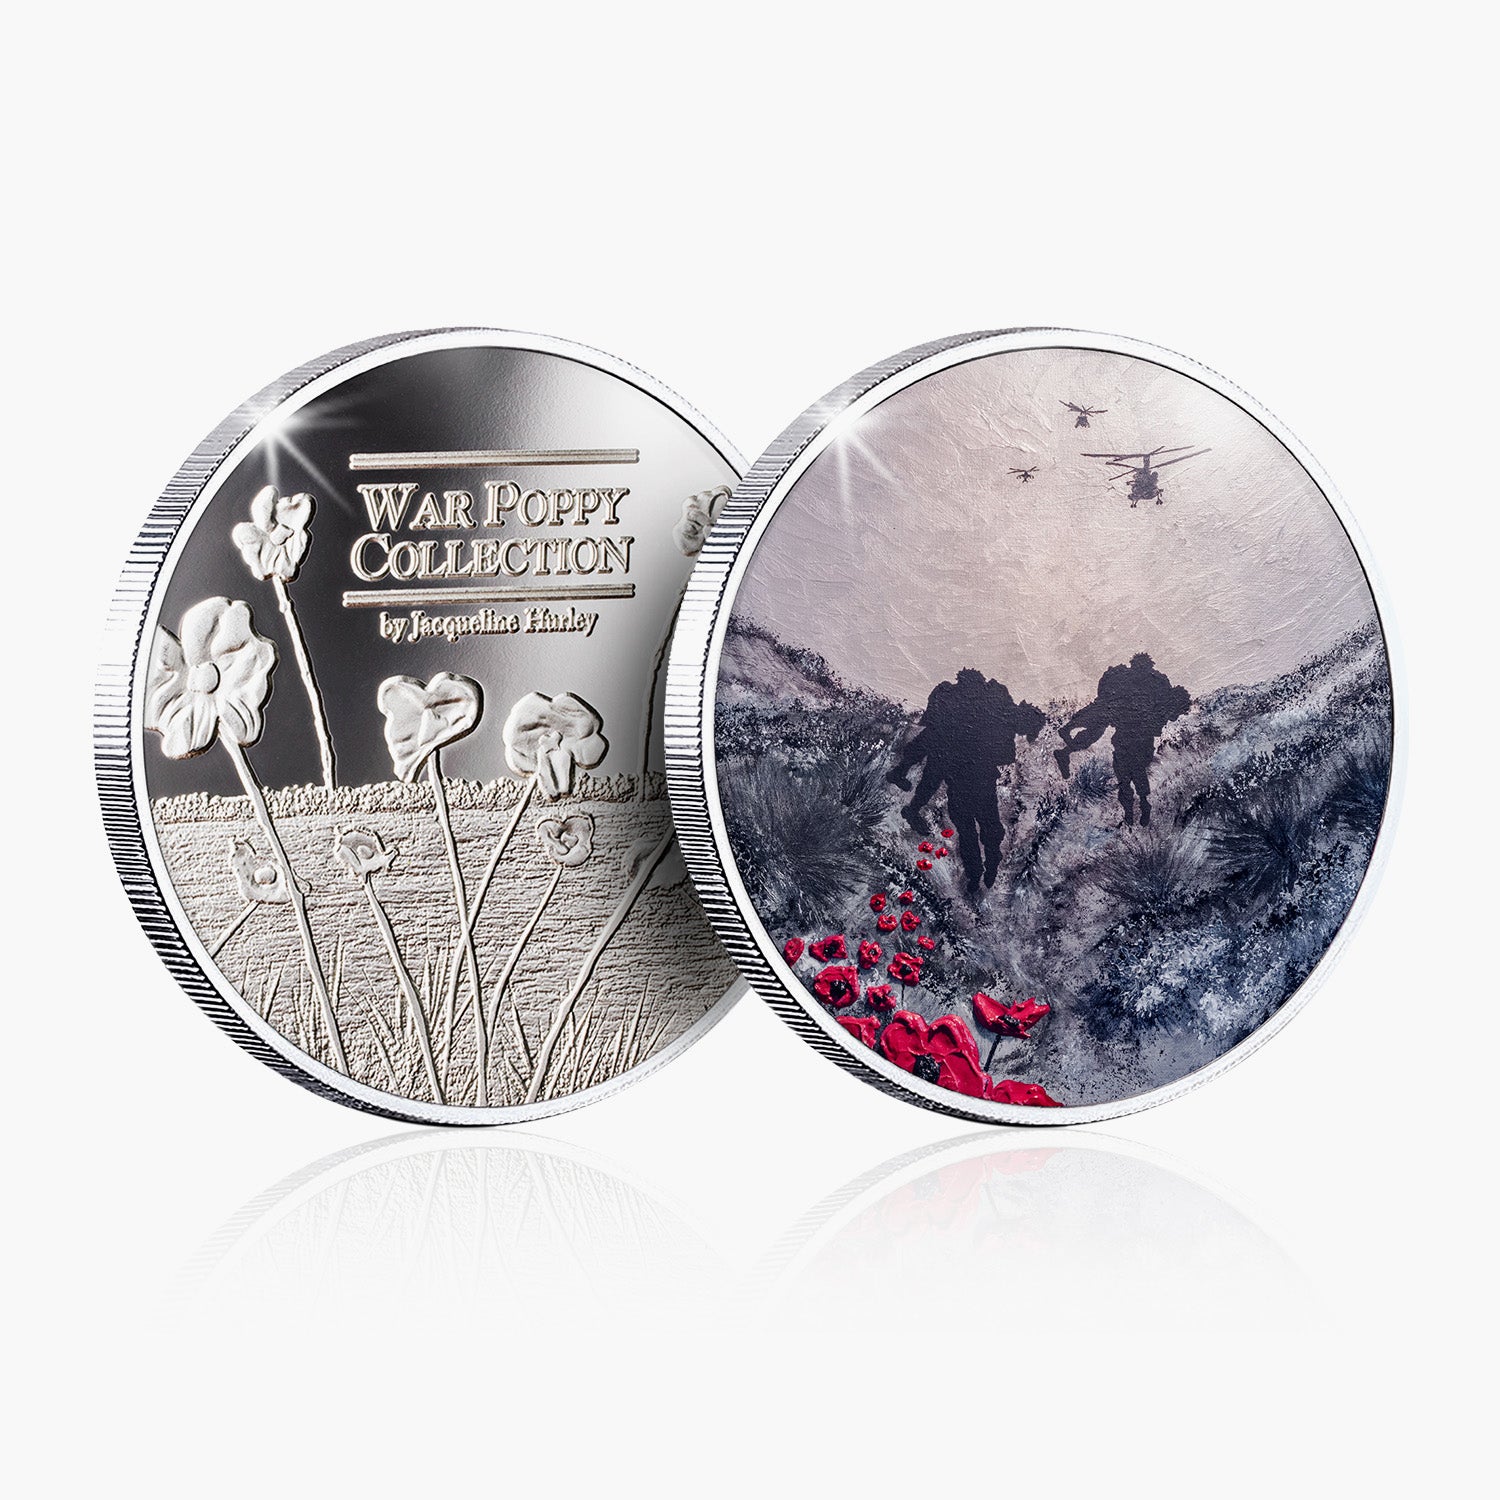 Brothers In Arms Silver-Plated Commemorative